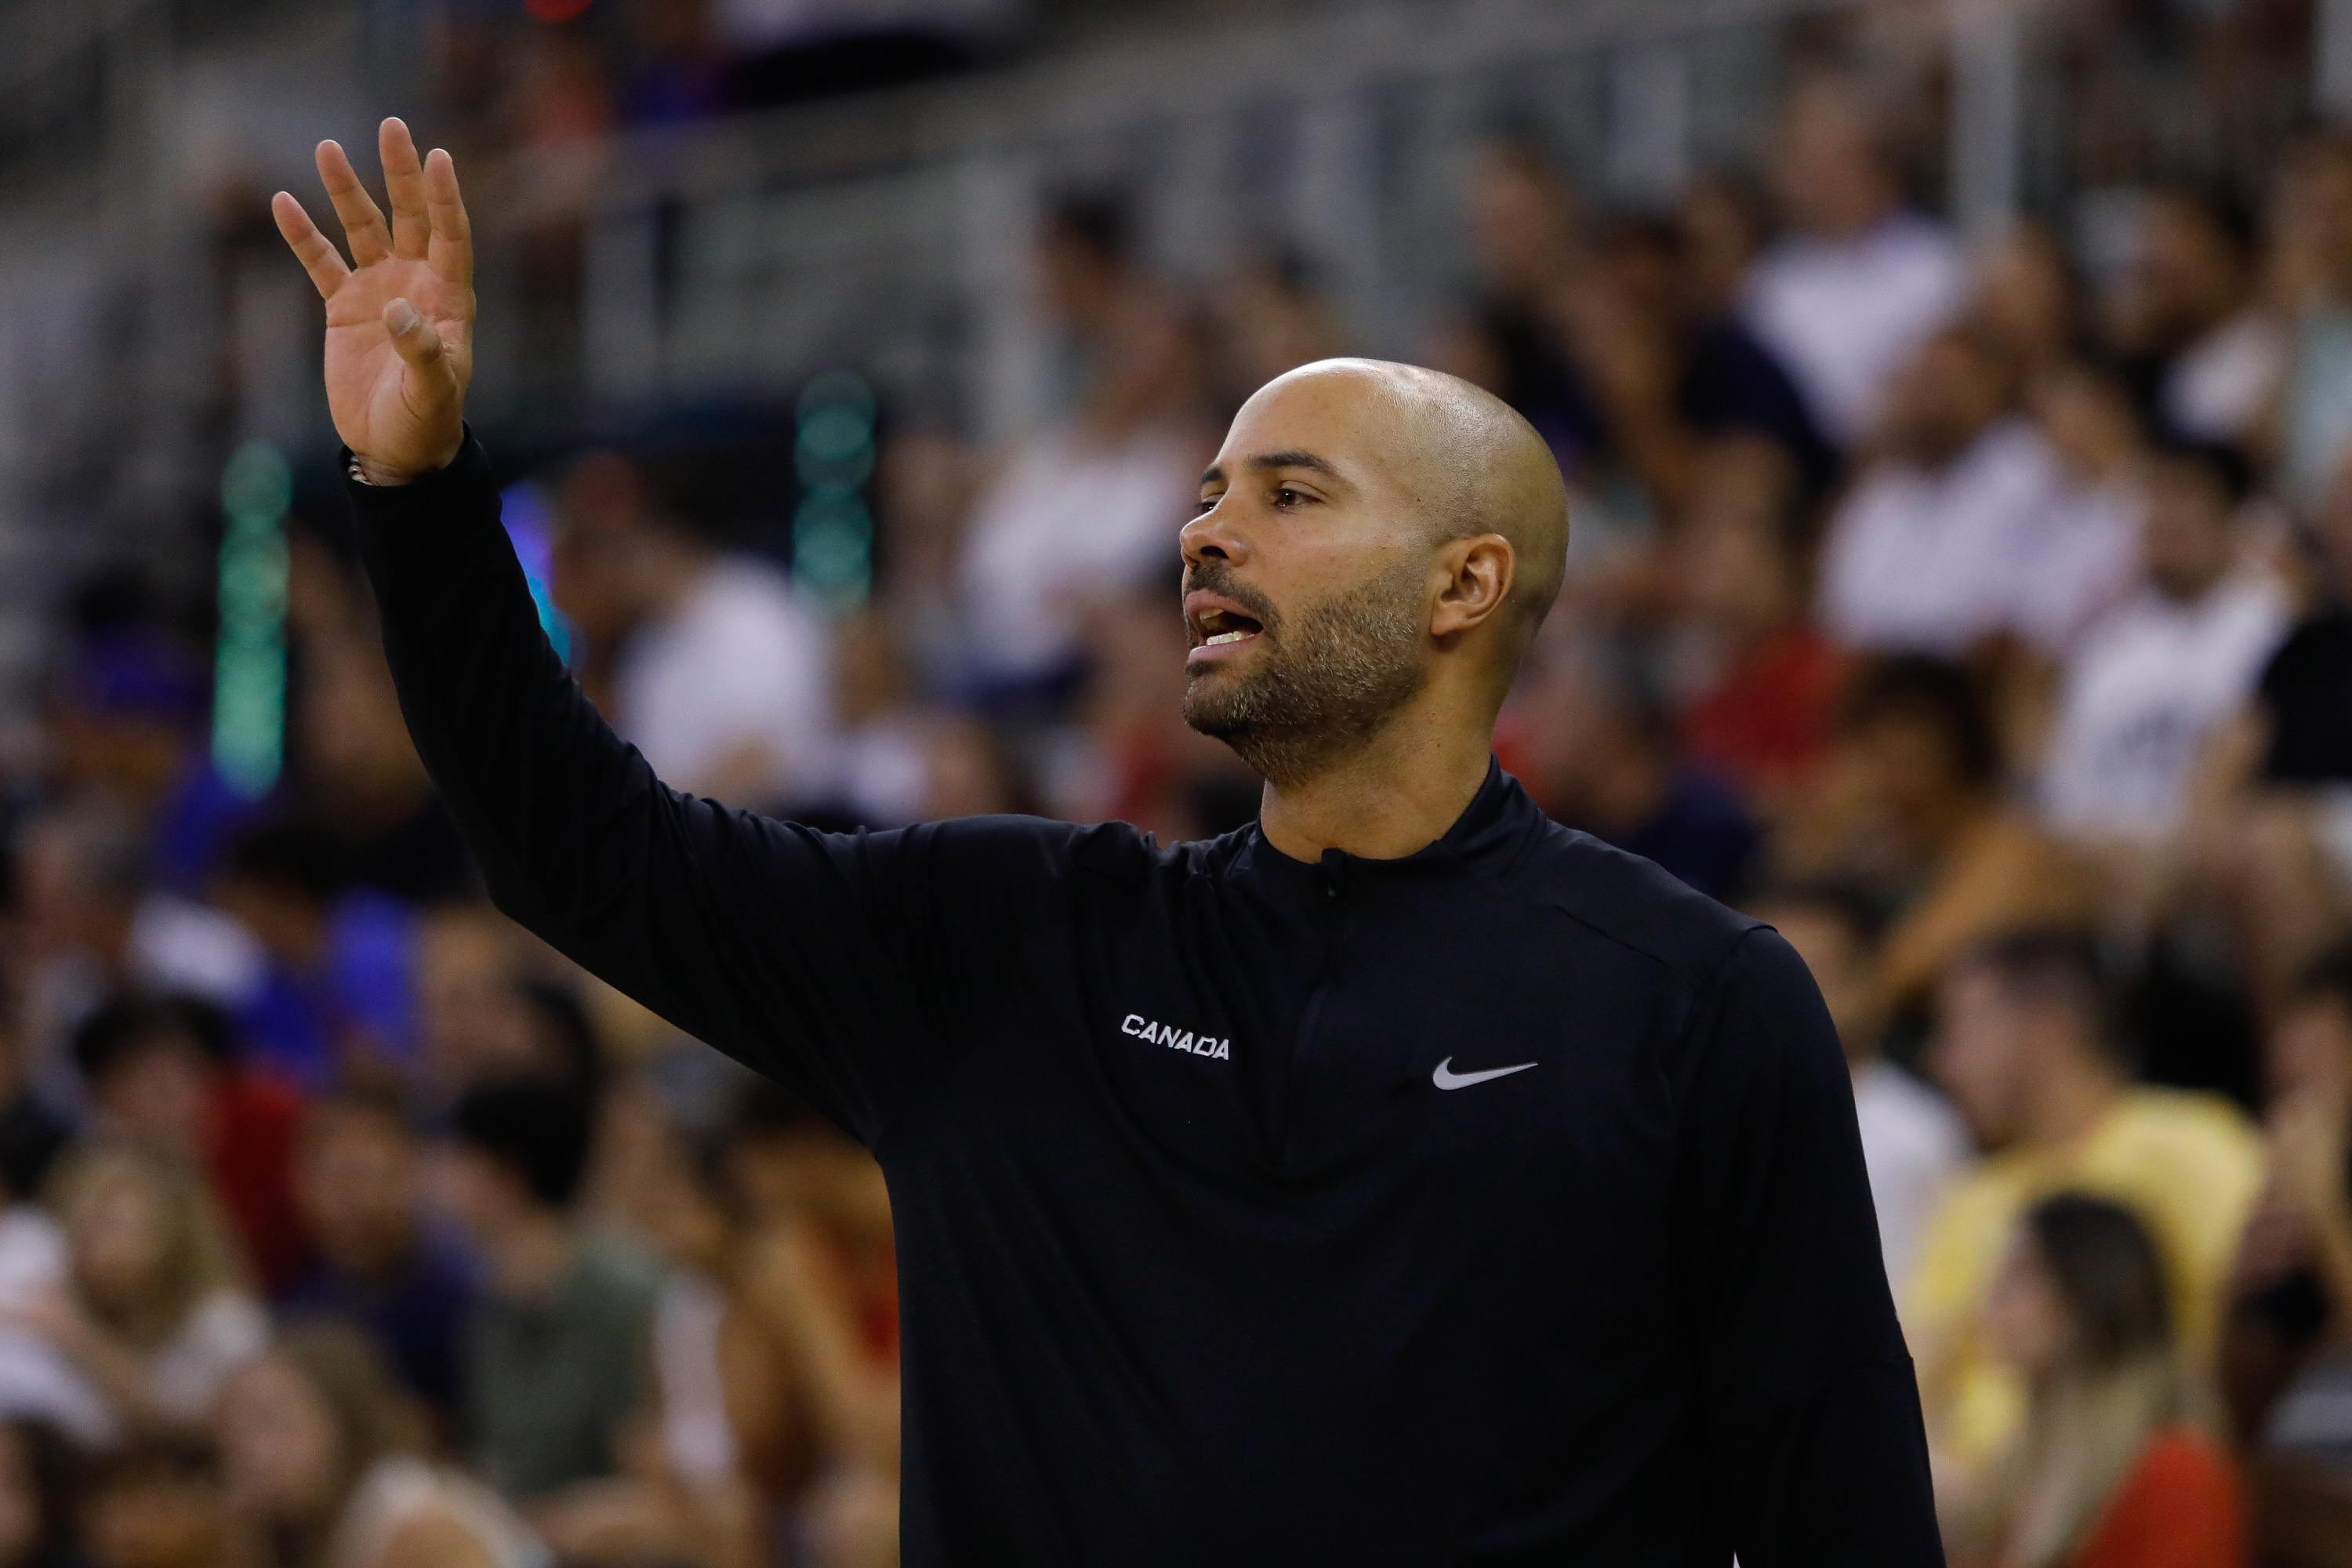 Basketball: Jordi Fernández becomes the first Spanish coach in NBA history